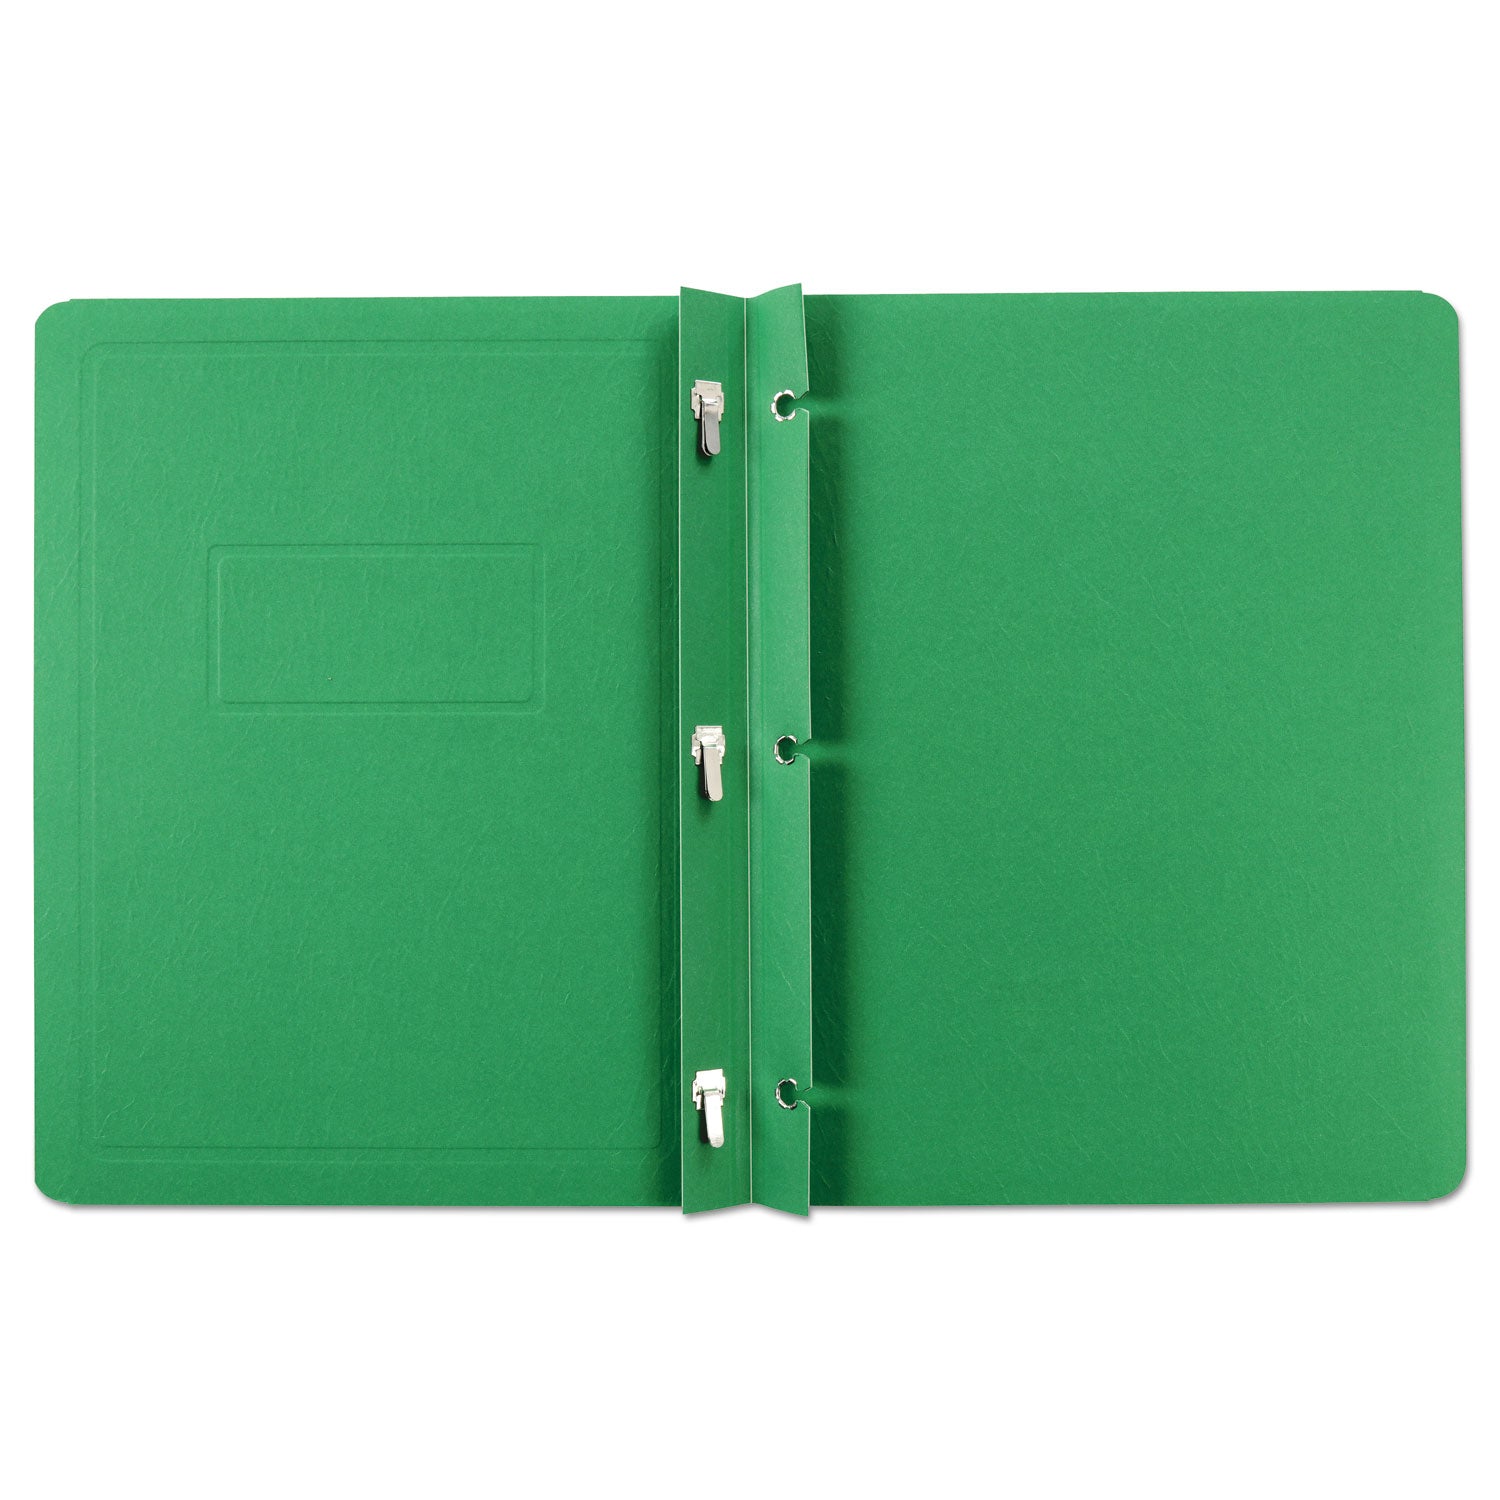 Title Panel and Border Front Report Cover, Three-Prong Fastener, 0.5" Capacity, 8.5 x 11, Light Green/Light Green, 25/Box - 